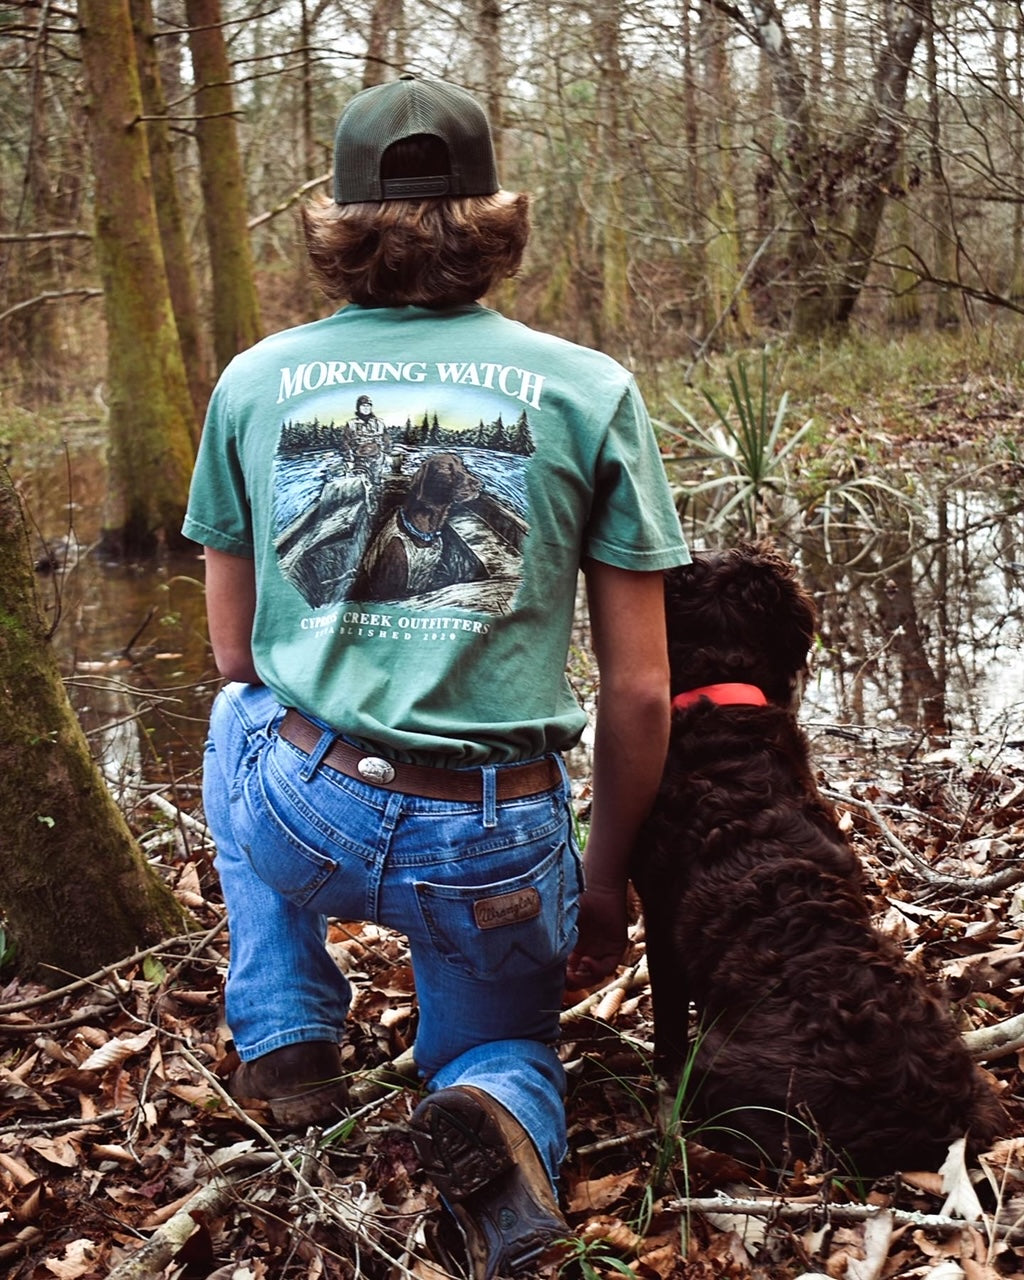 Dip Can Tee – Cypress Creek Outfitters